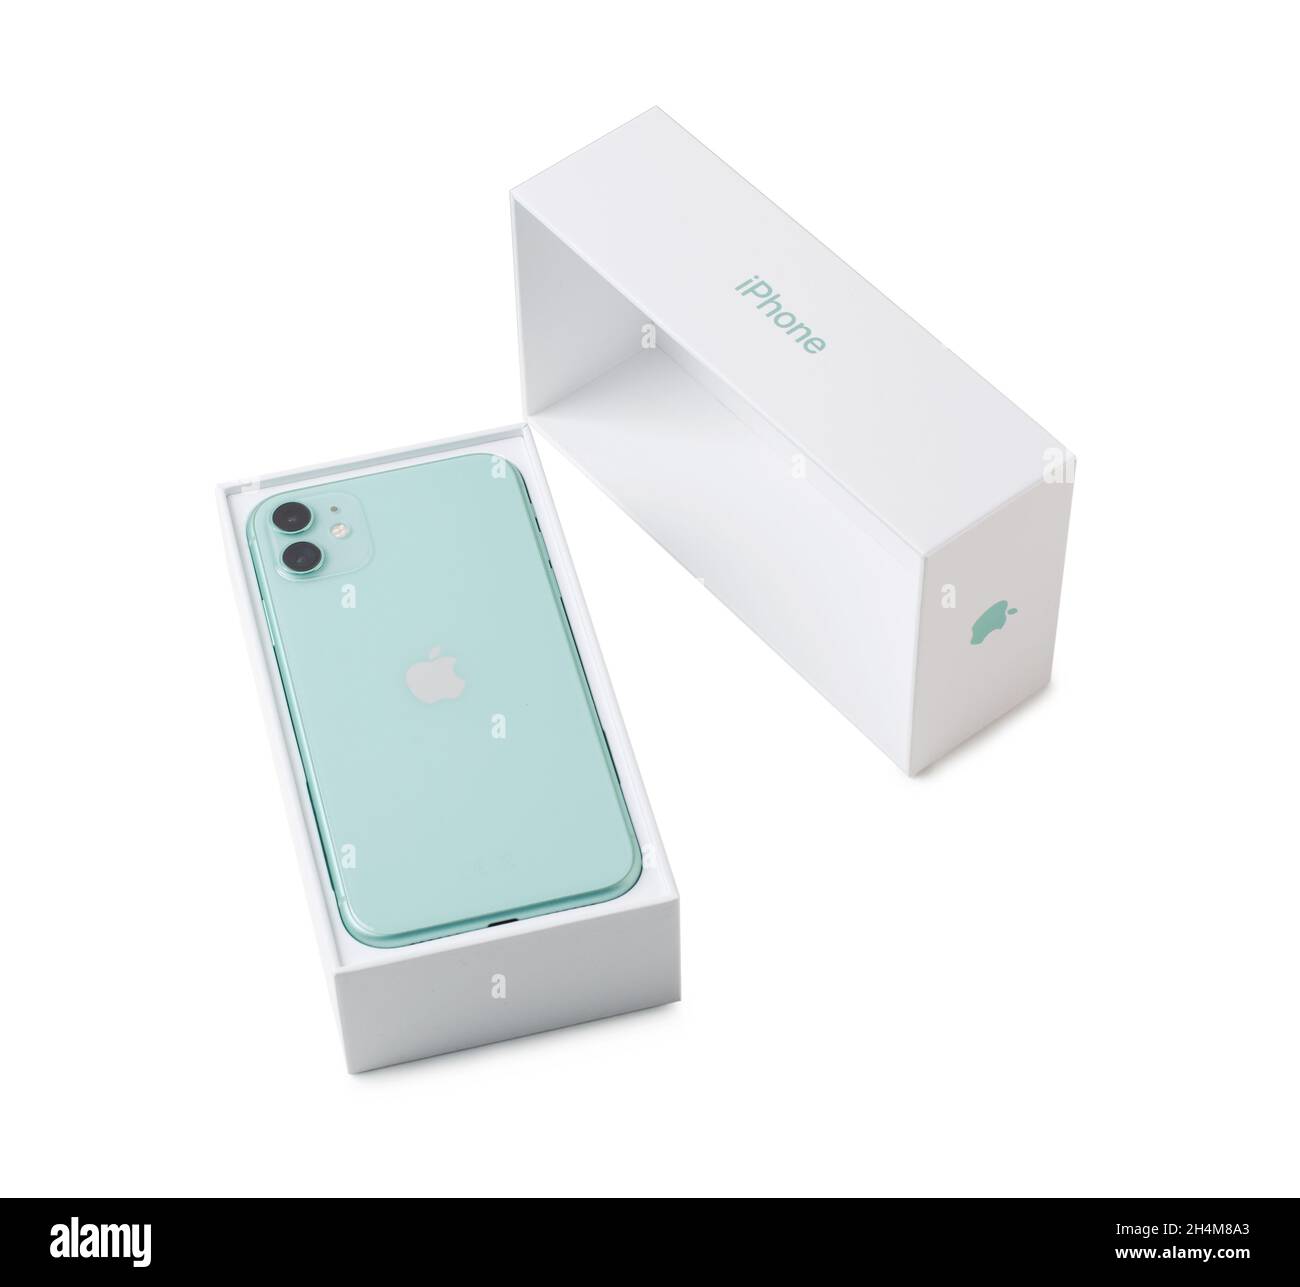 Moscow, Russia - April 20, 2020: Green Apple iPhone 11 with box isolated on a white background. Close-up of a new smartphone from Apple and a box from Stock Photo